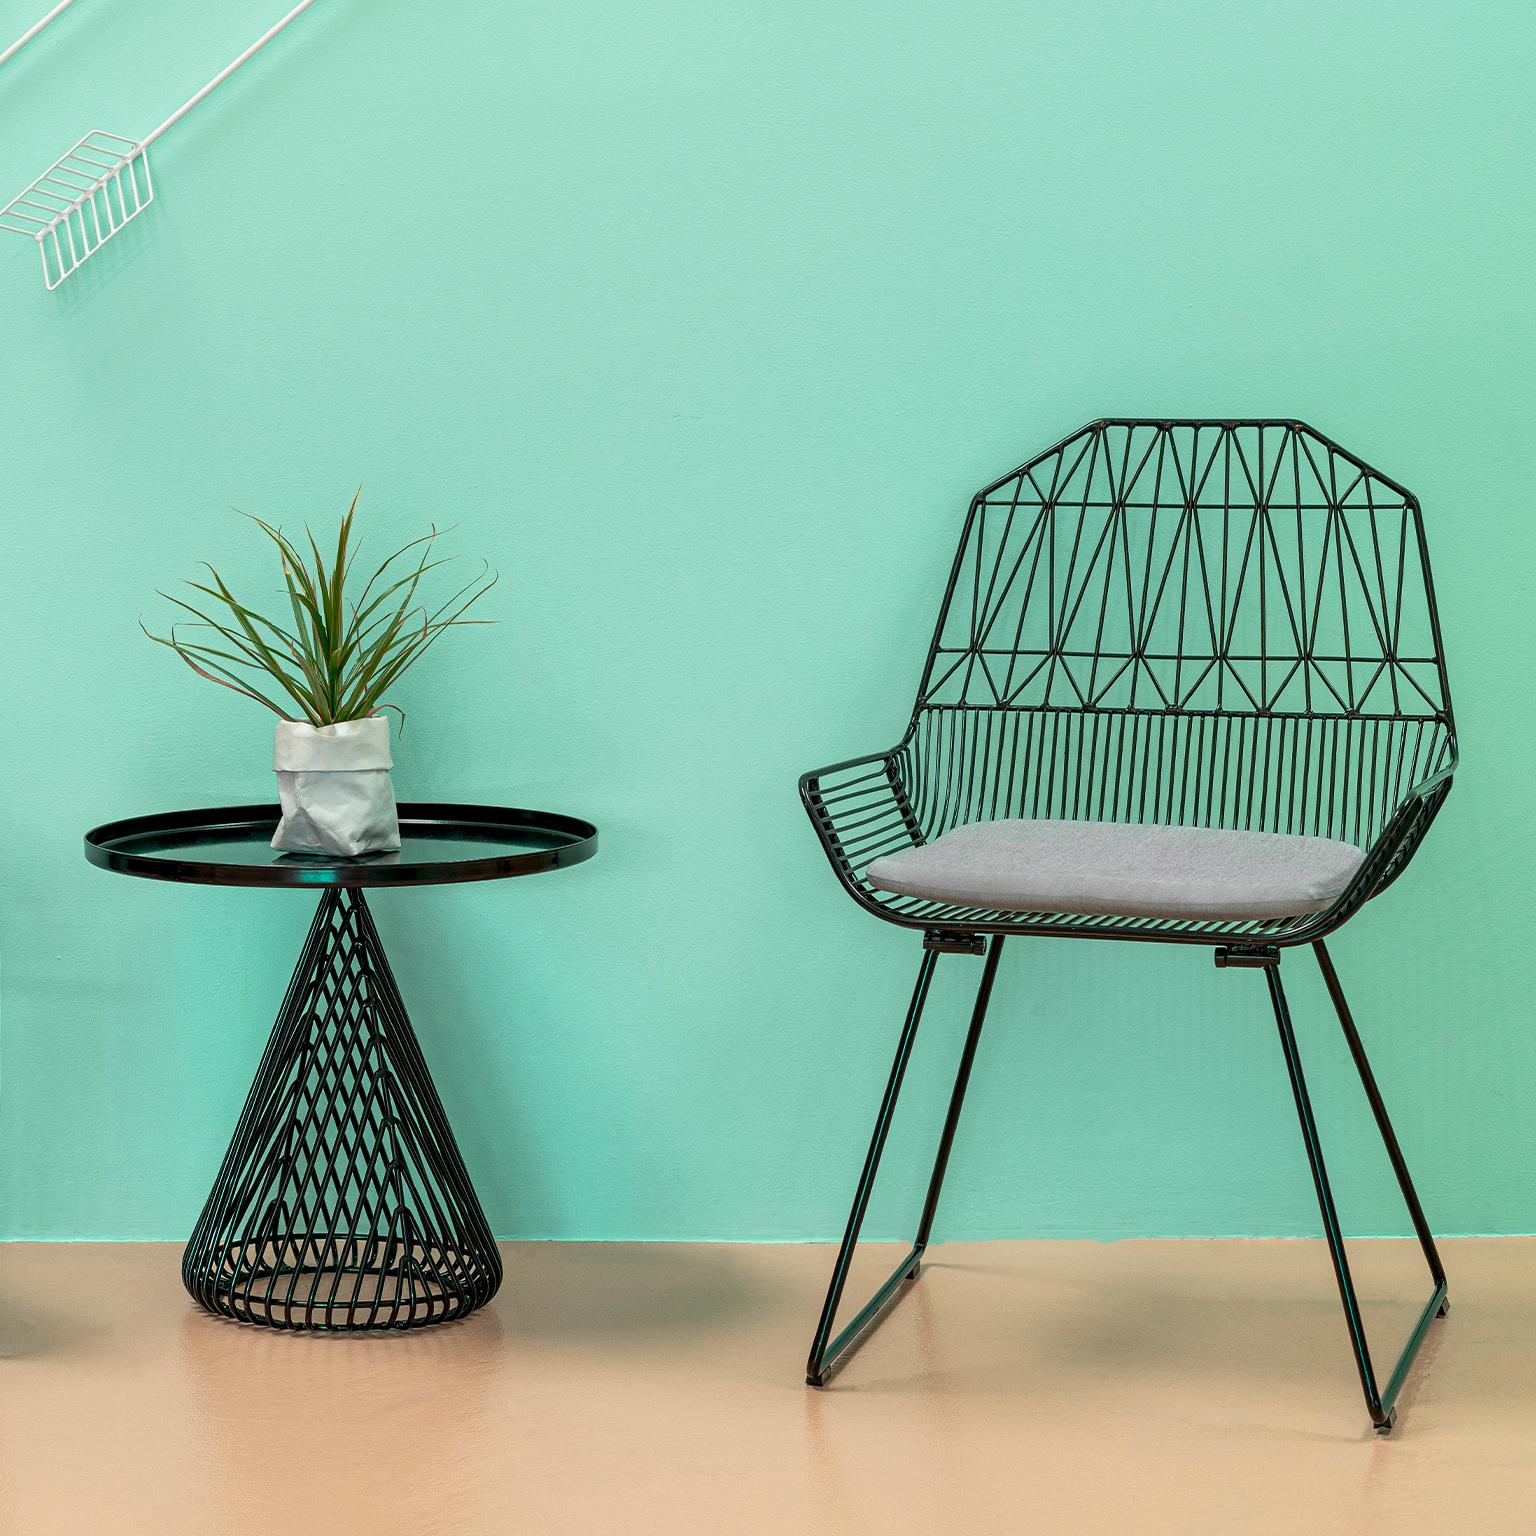 Metal Modern, Midcentury Inspired Wire Lounge Chair, the Farmhouse in Peacock Blue